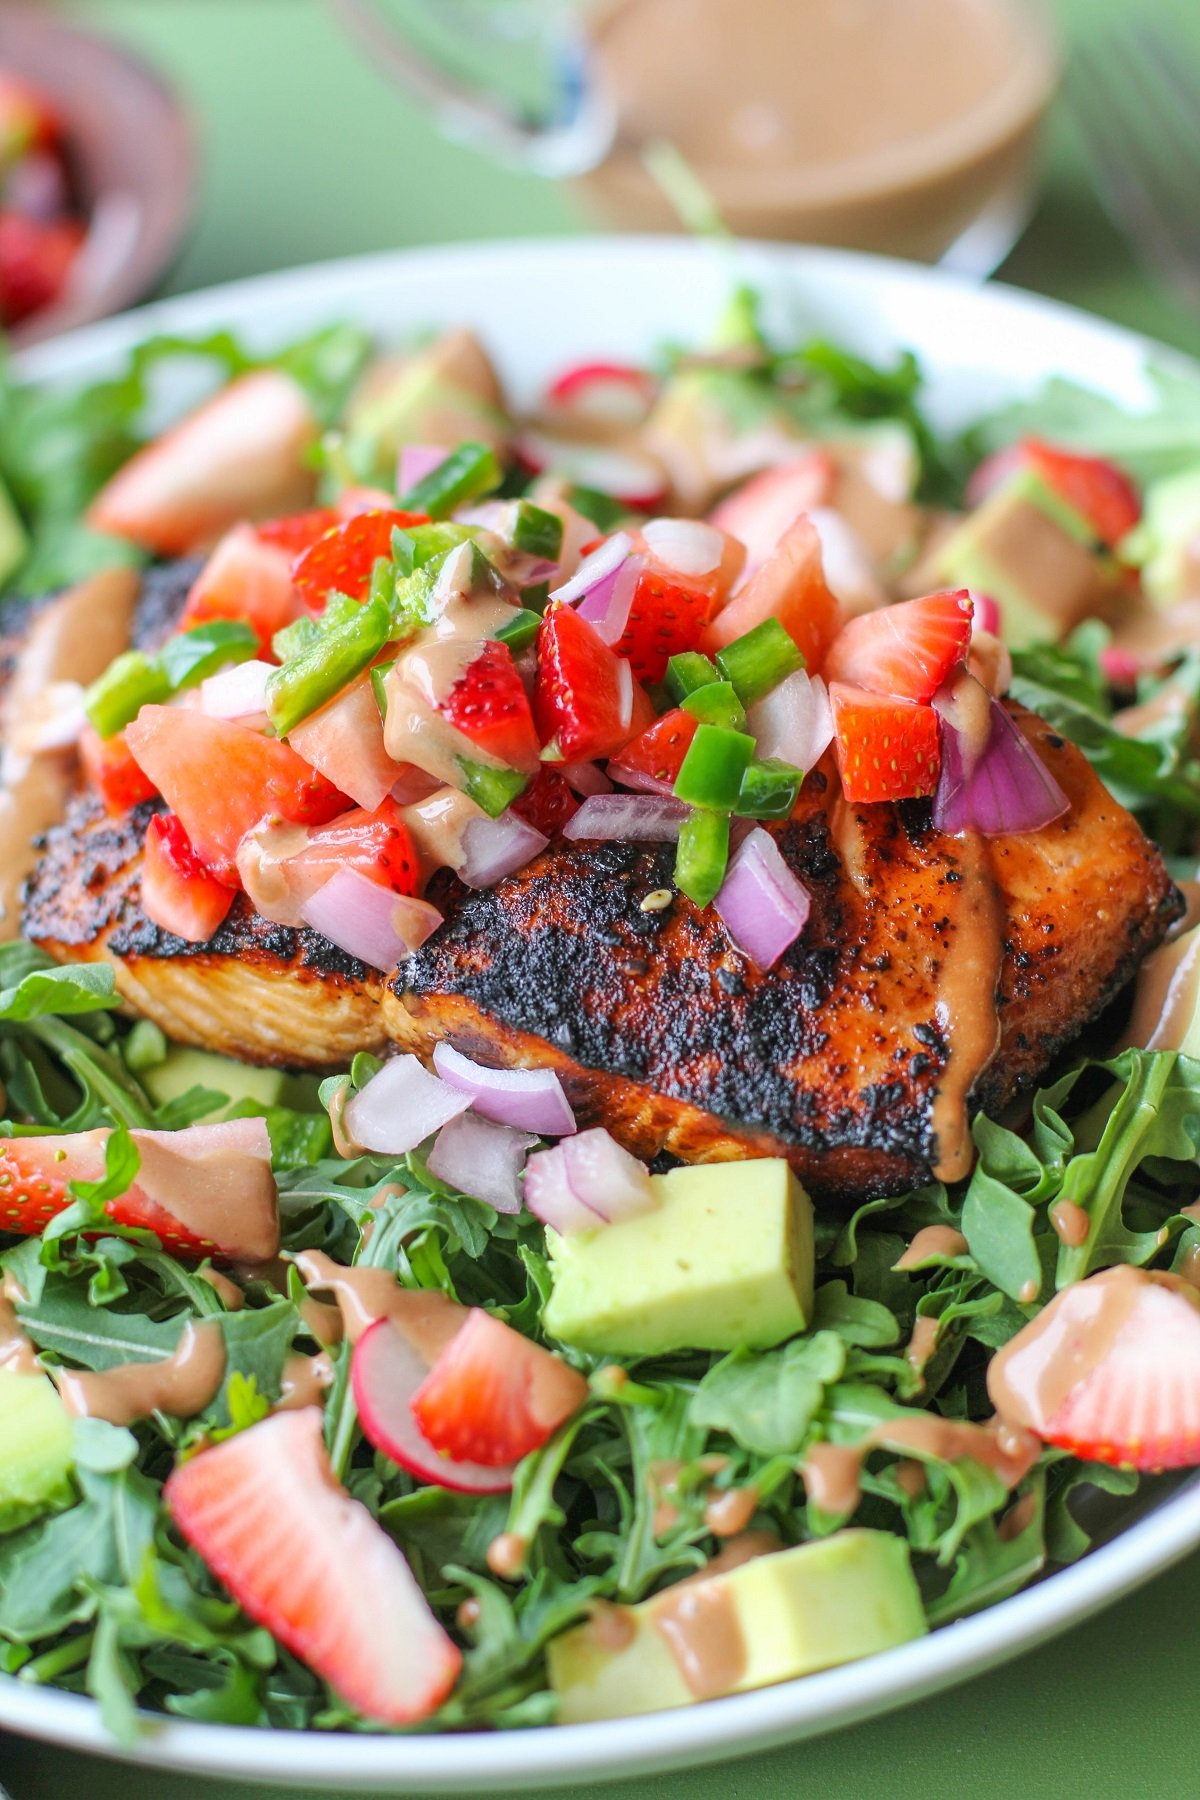 Grilled salmon on a bed of baby arugula with strawberry salsa, avocado, radishes and balsamic vinaigrette, ready to eat